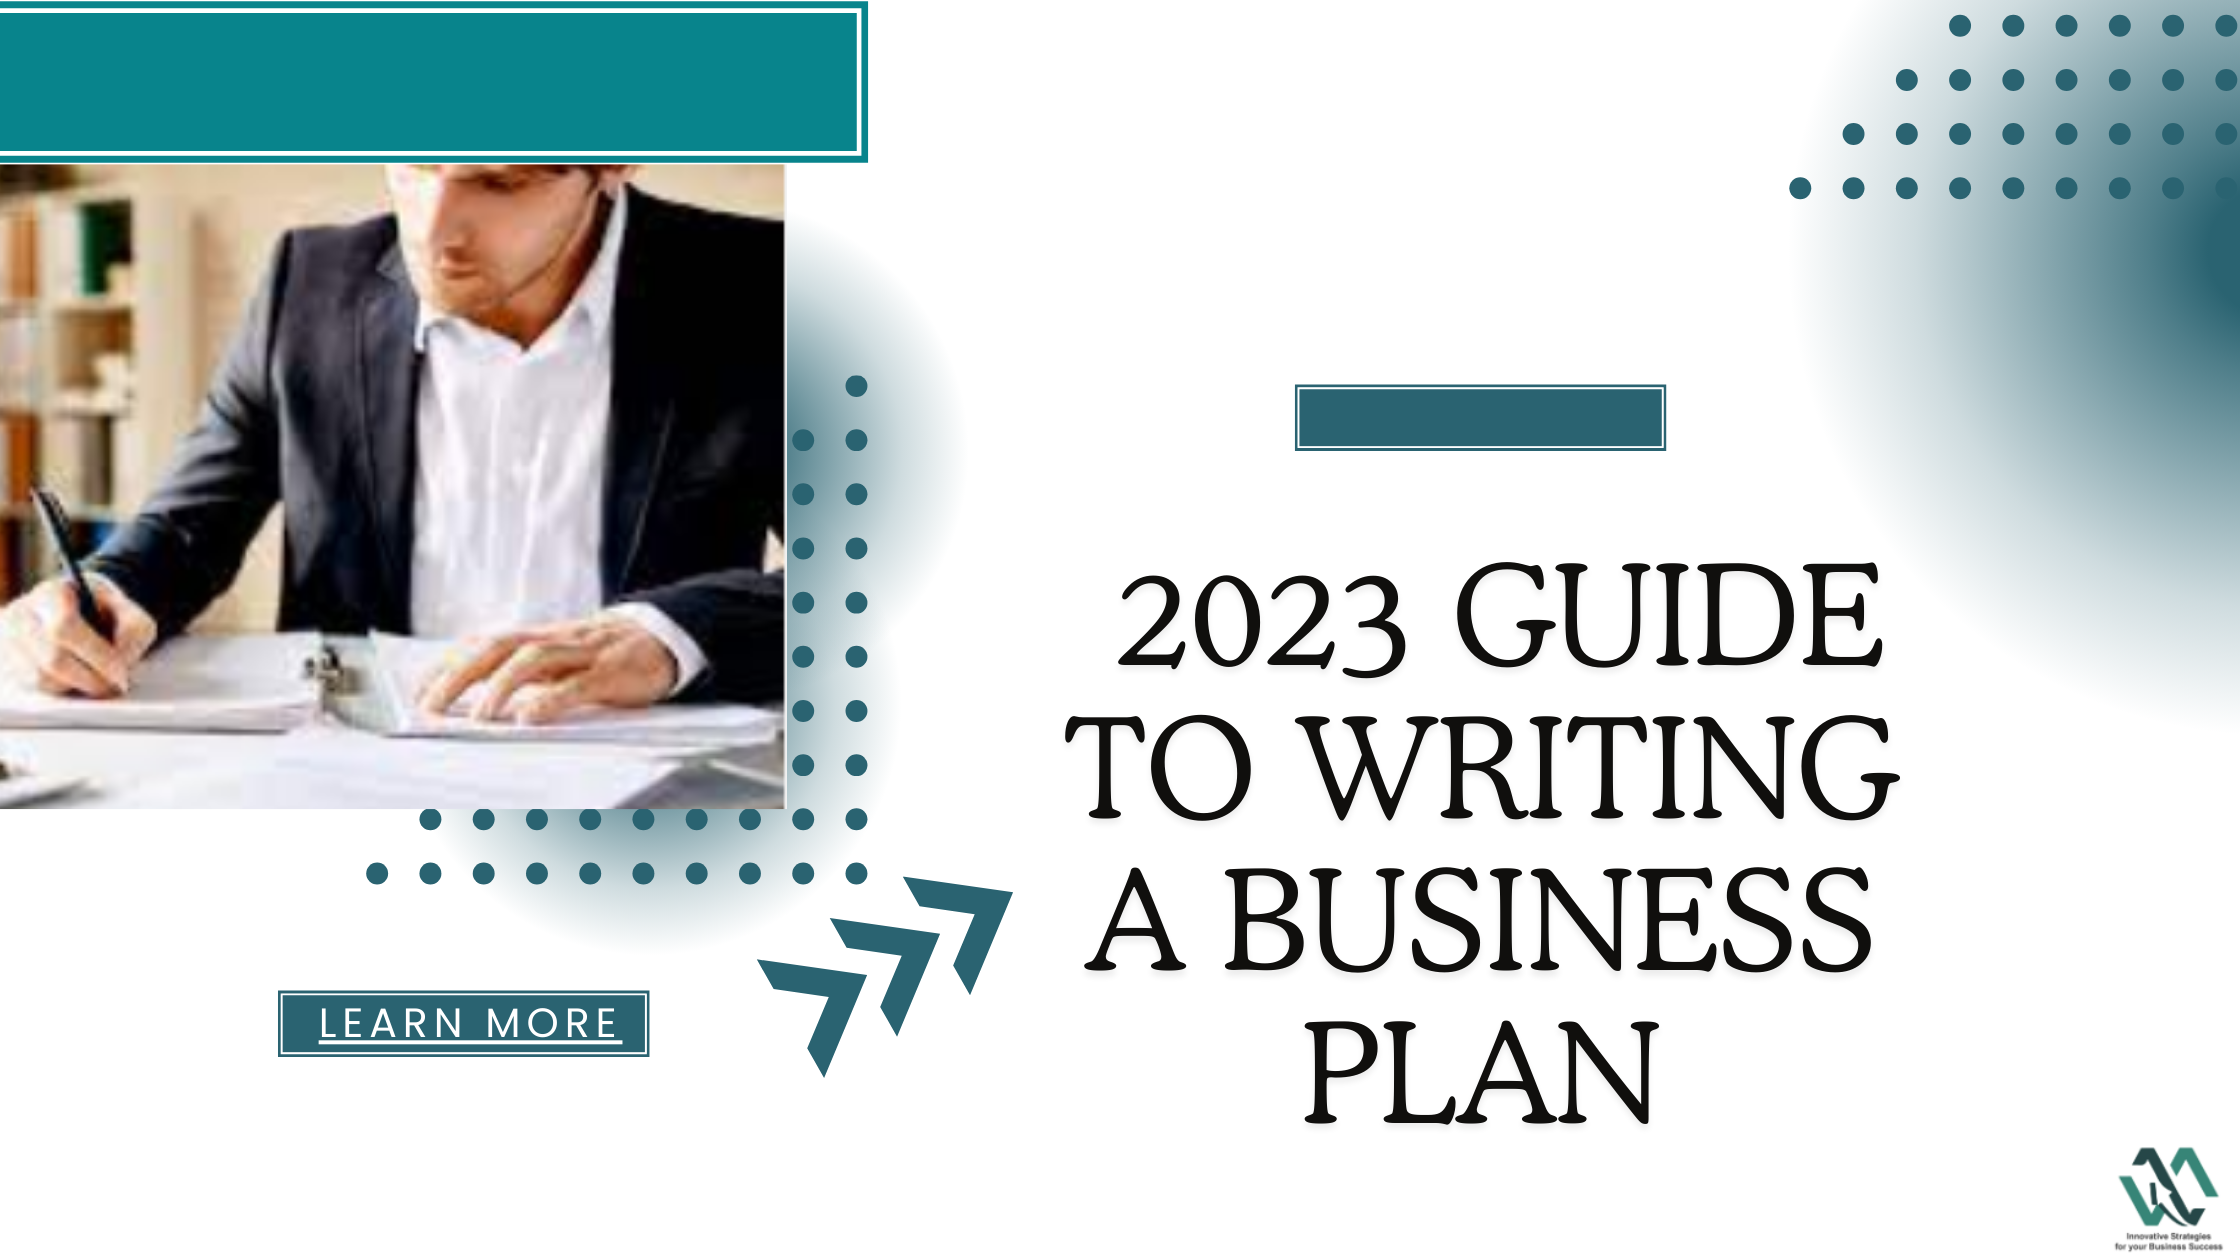 How to write Business Plan in 24 hours